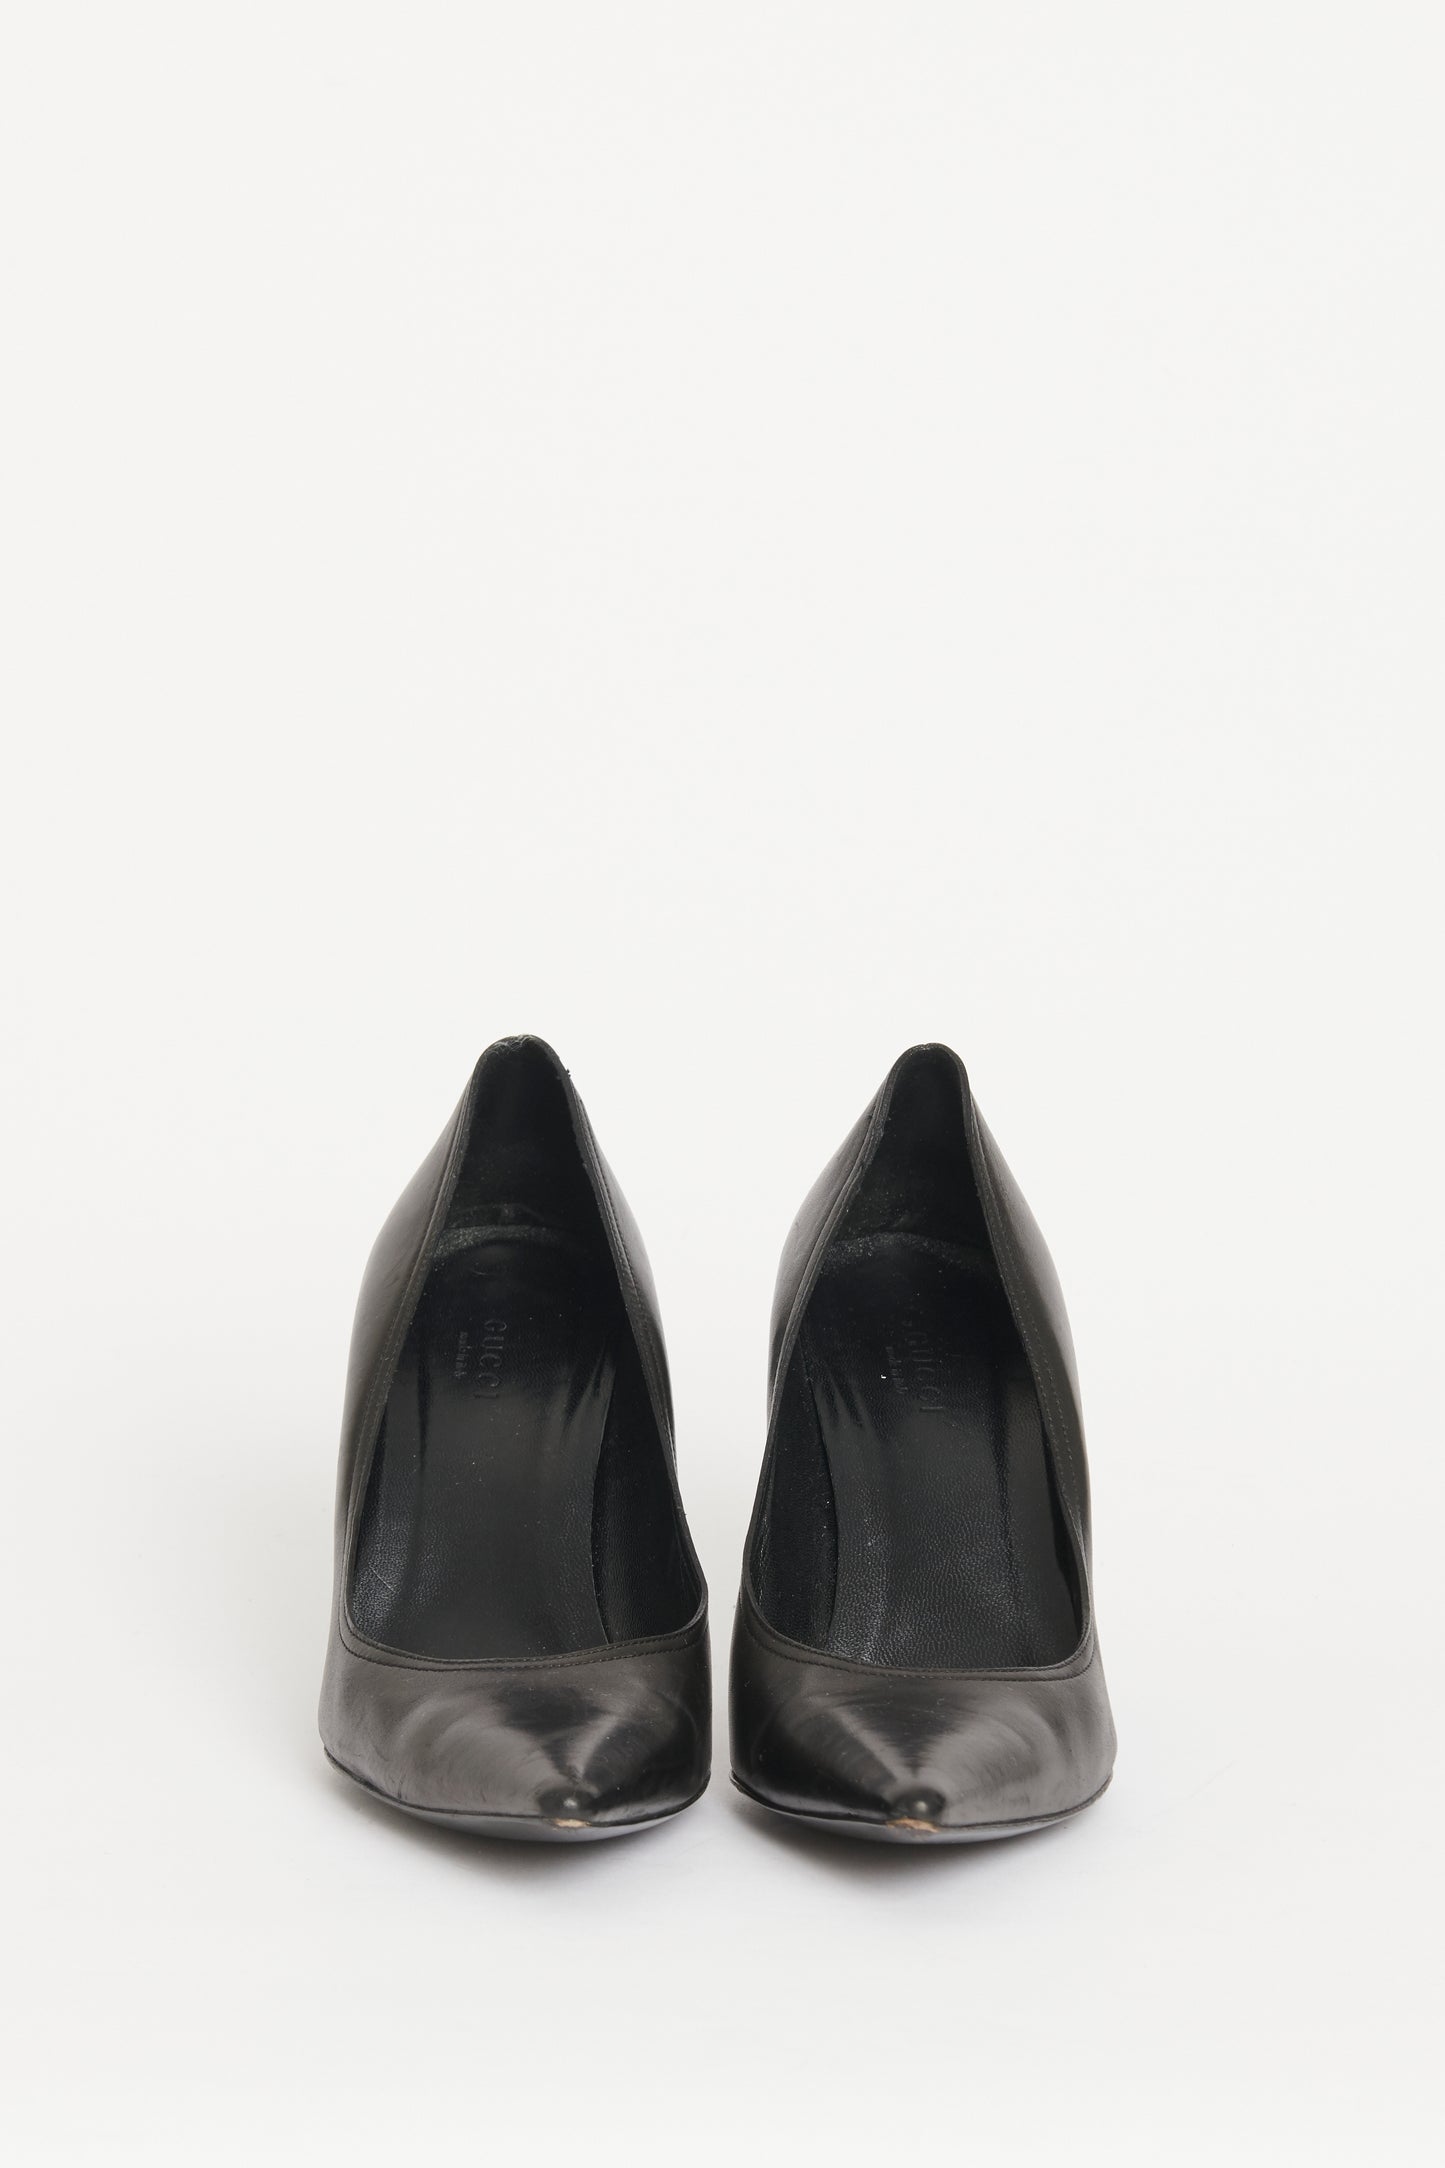 Black Leather Preowned Pointed Toe Pumps